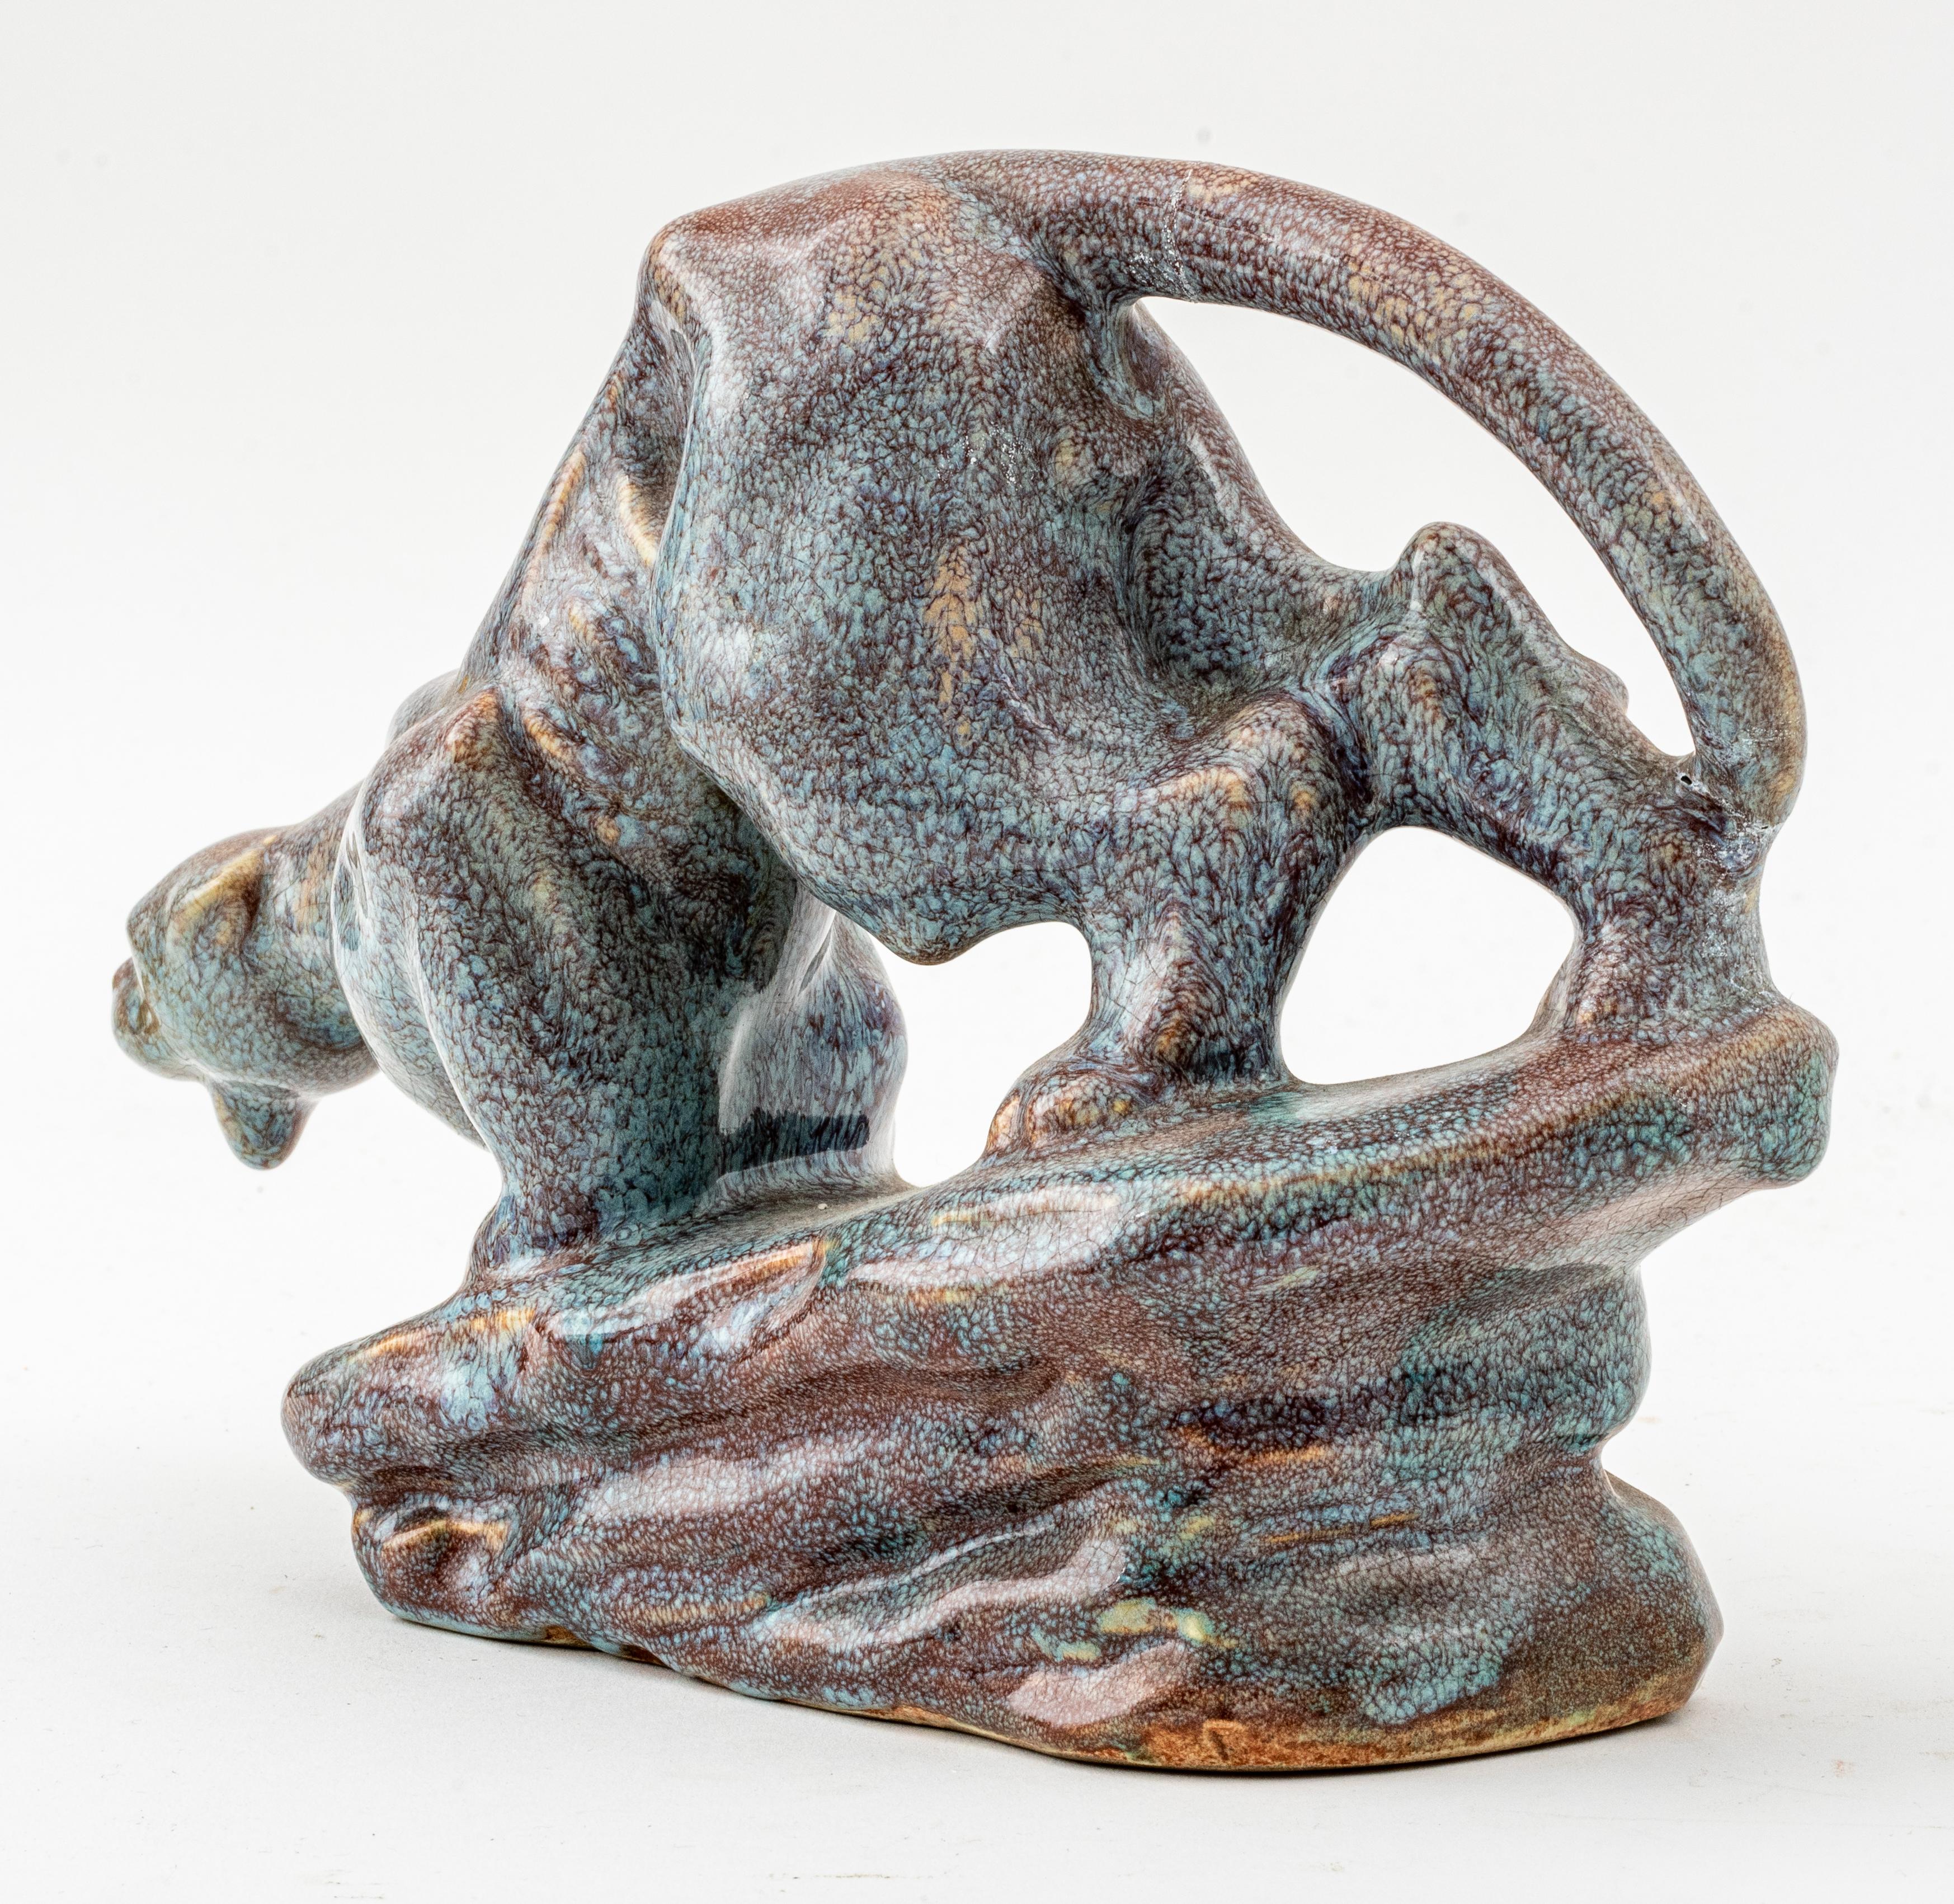 Crouching panther ceramic pottery sculpture, Unsigned.
Measures: 7.5